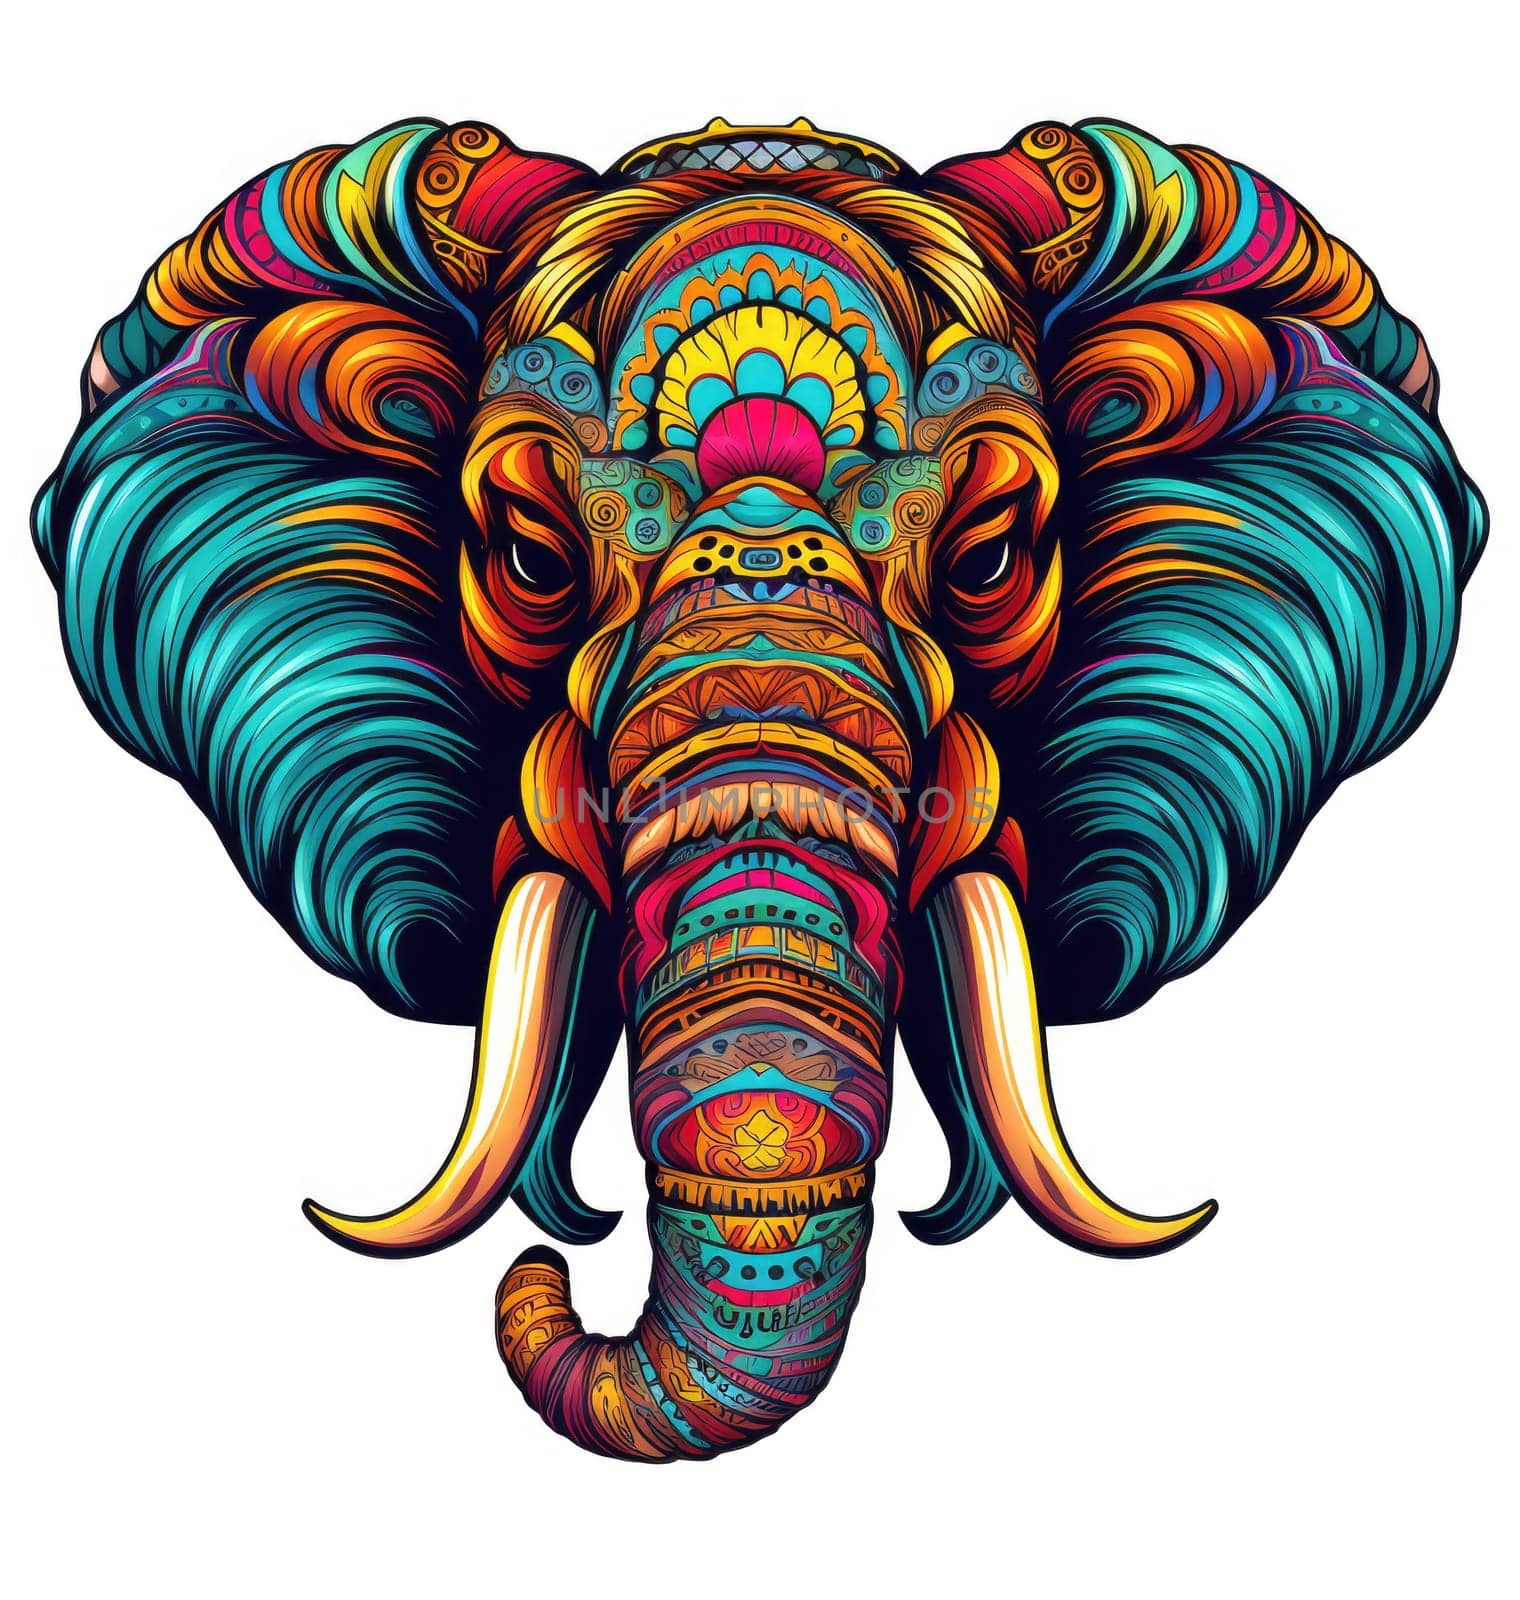 Mammoth in bright colourful psychedelic pop art style isolated on white background Template for t-shirt print, sticker, design element etc.